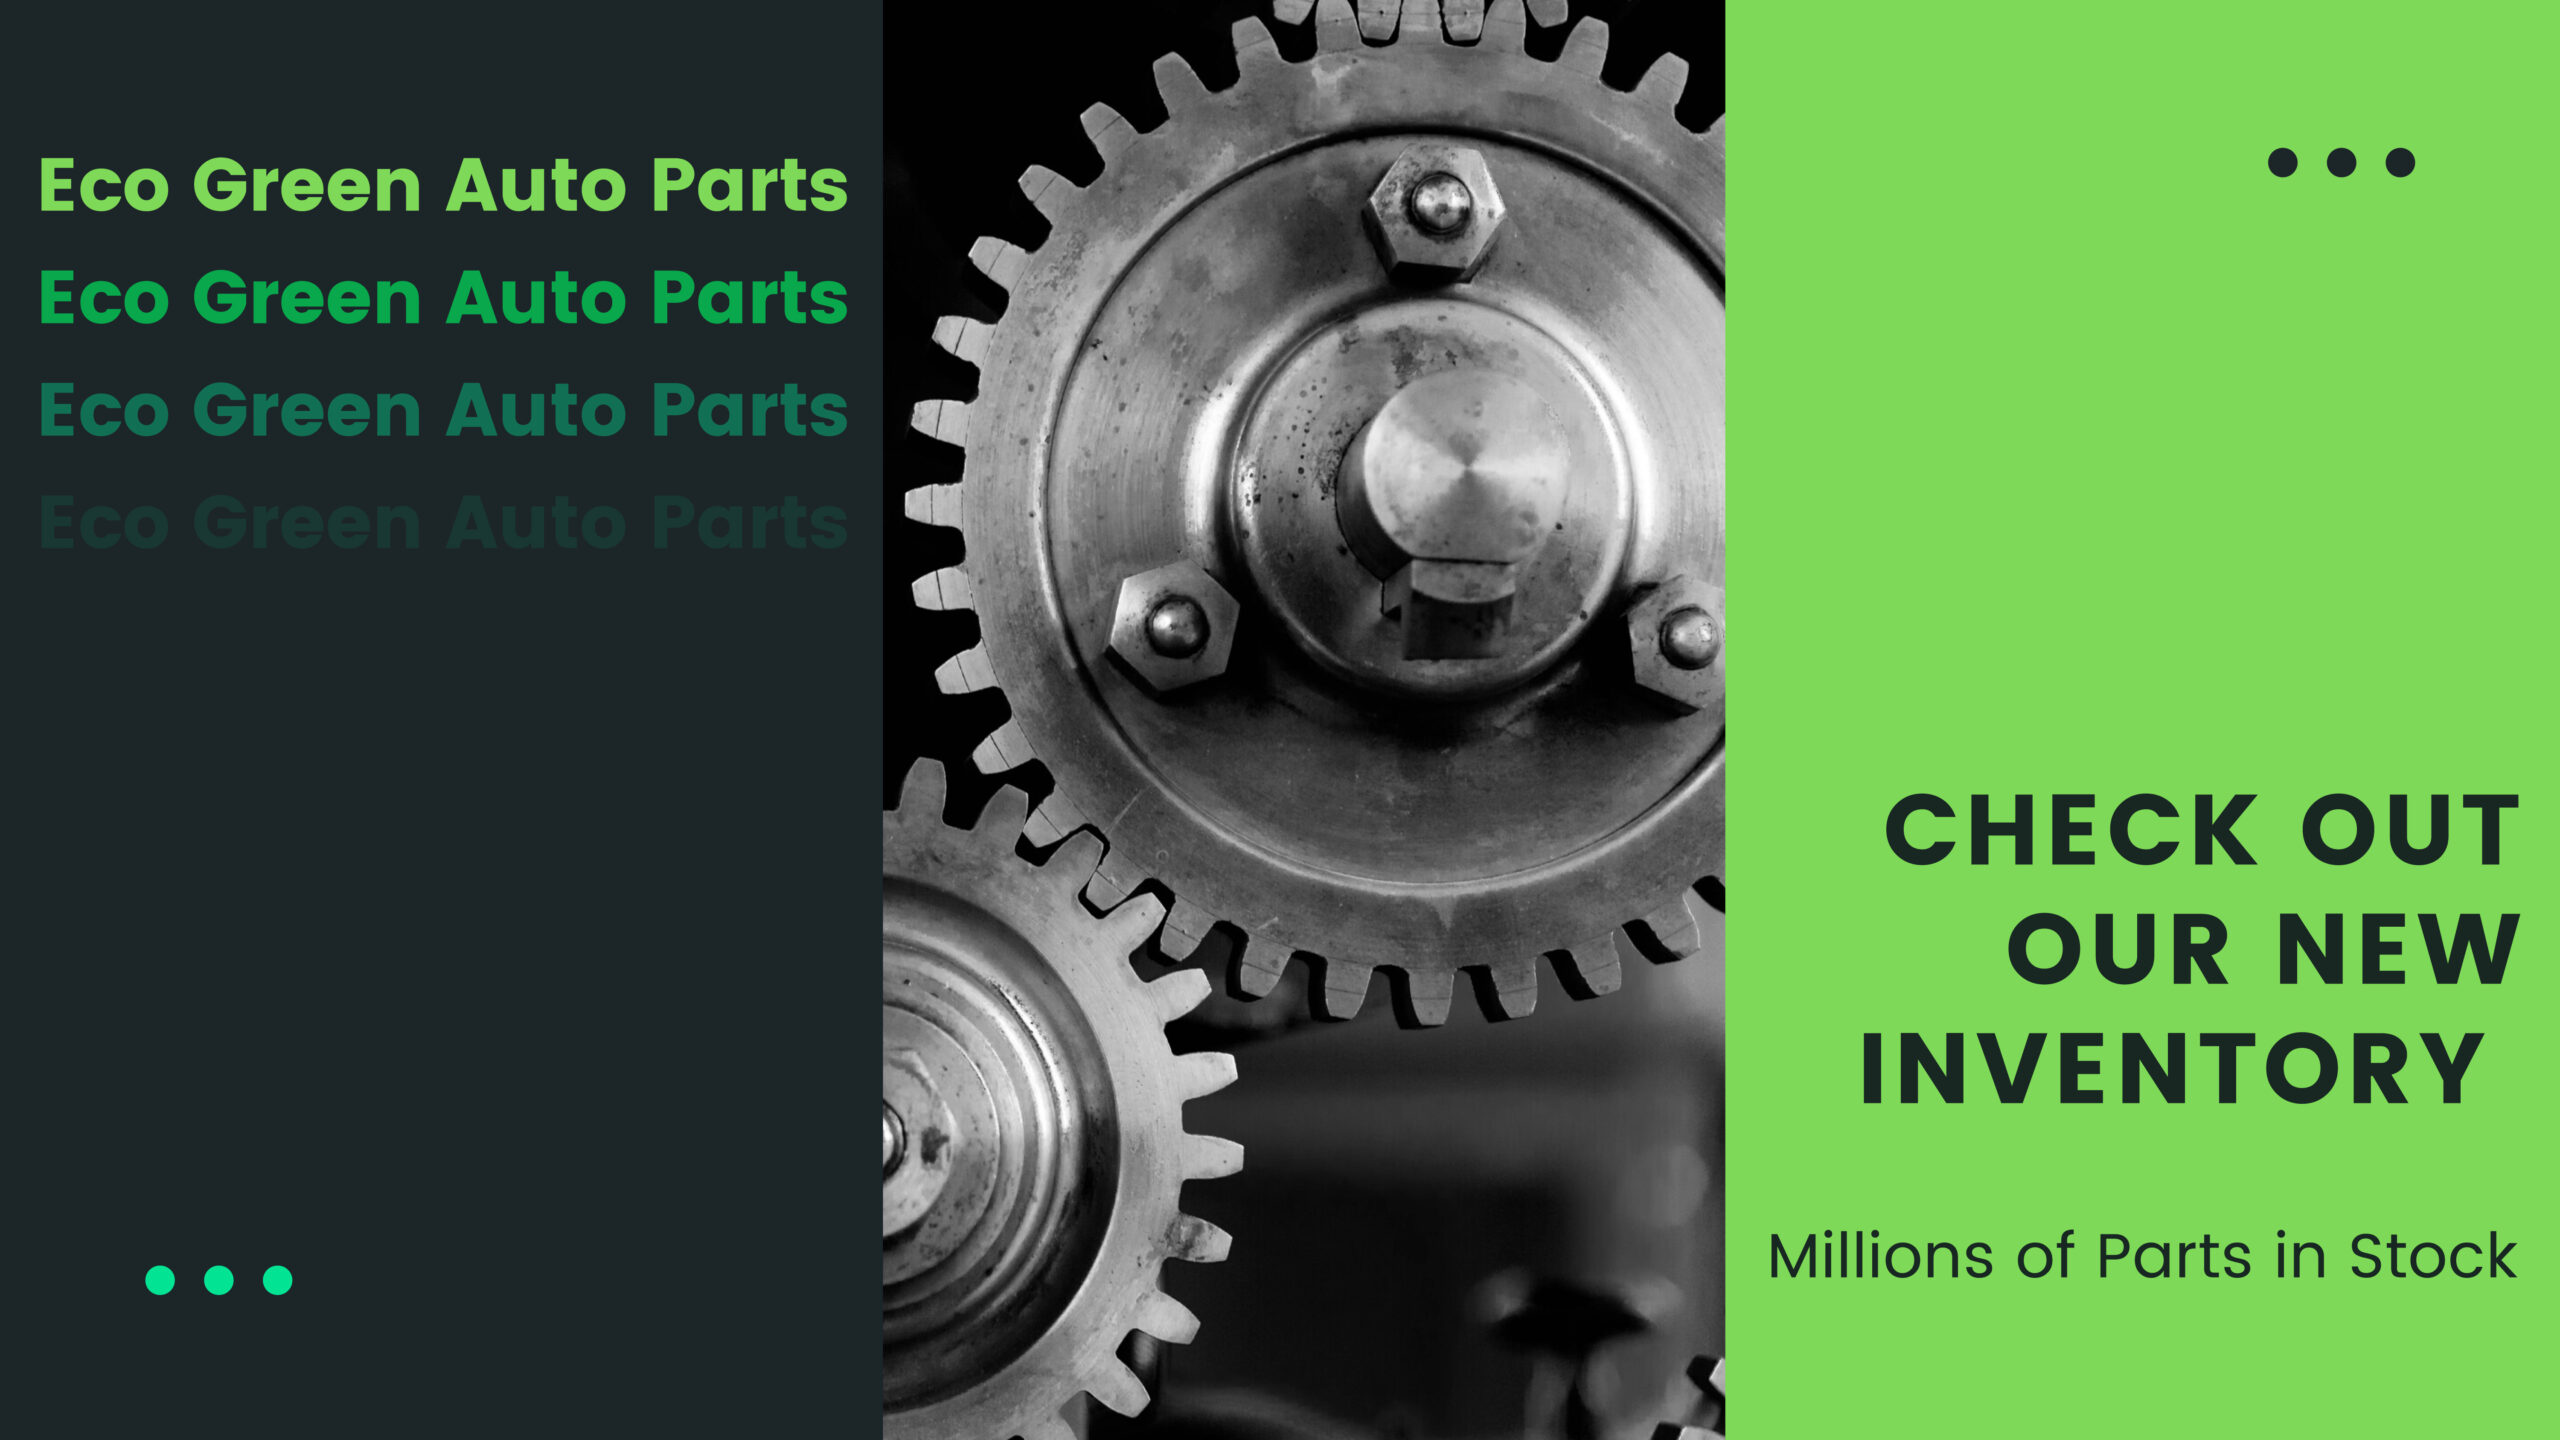 Eco Green Auto Parts: Check Out Our New. Millions of Parts in Stock